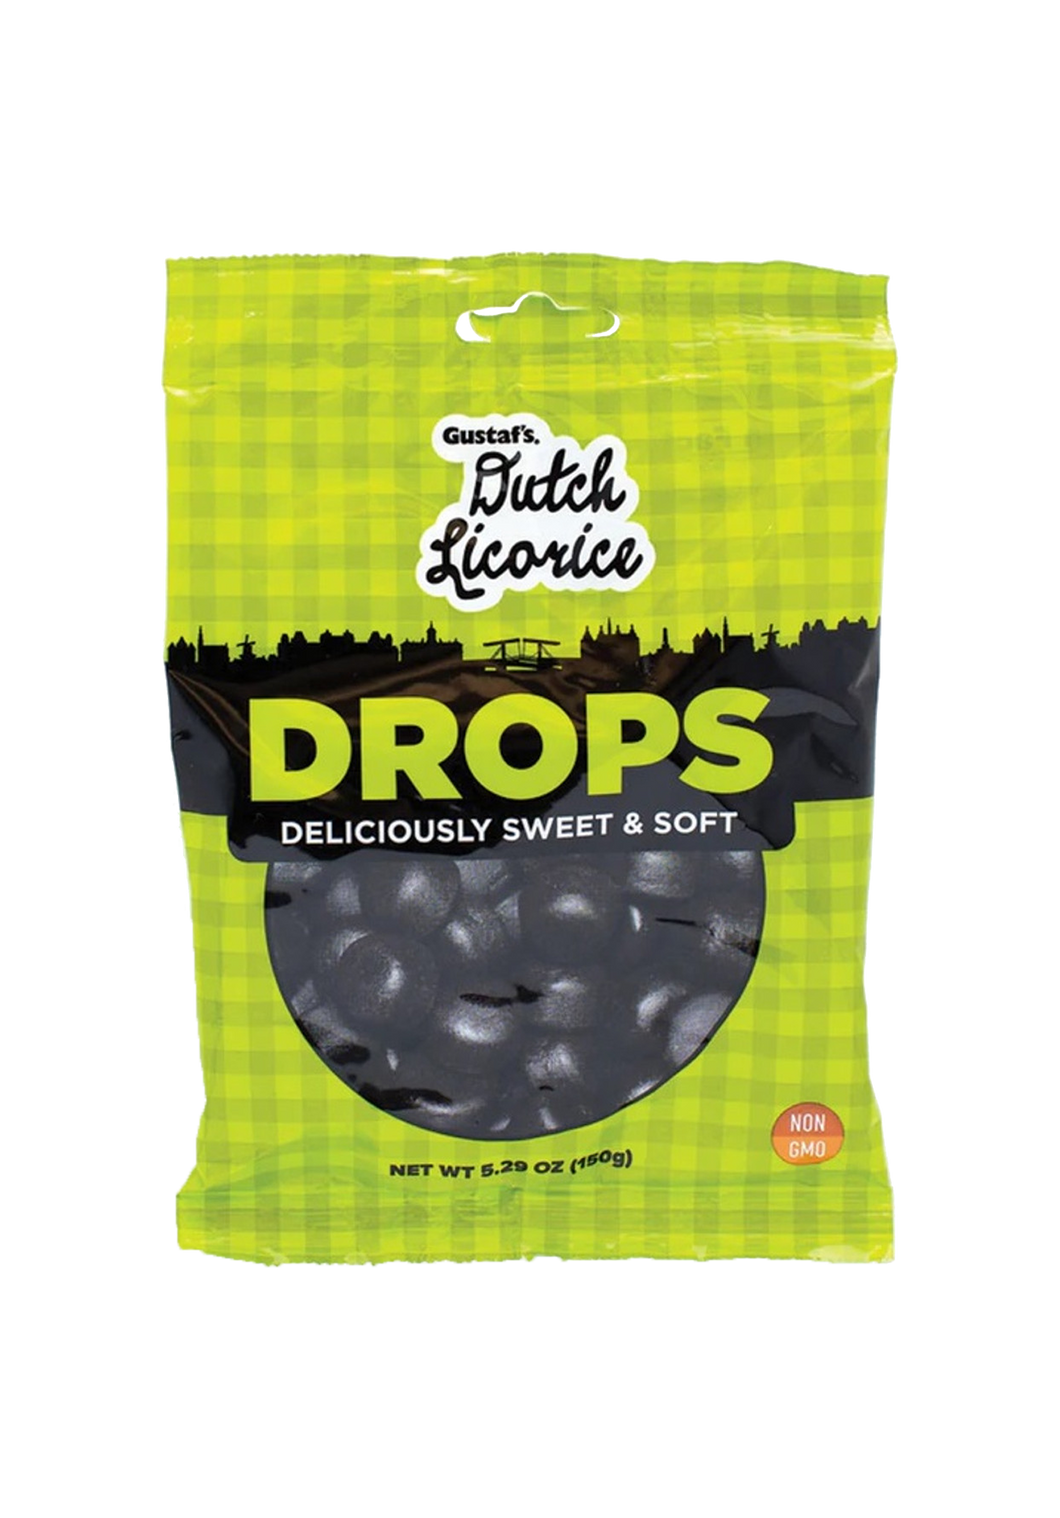 Gustaf's Dutch Licorice Drops Deliciously Sweet & Soft 150g